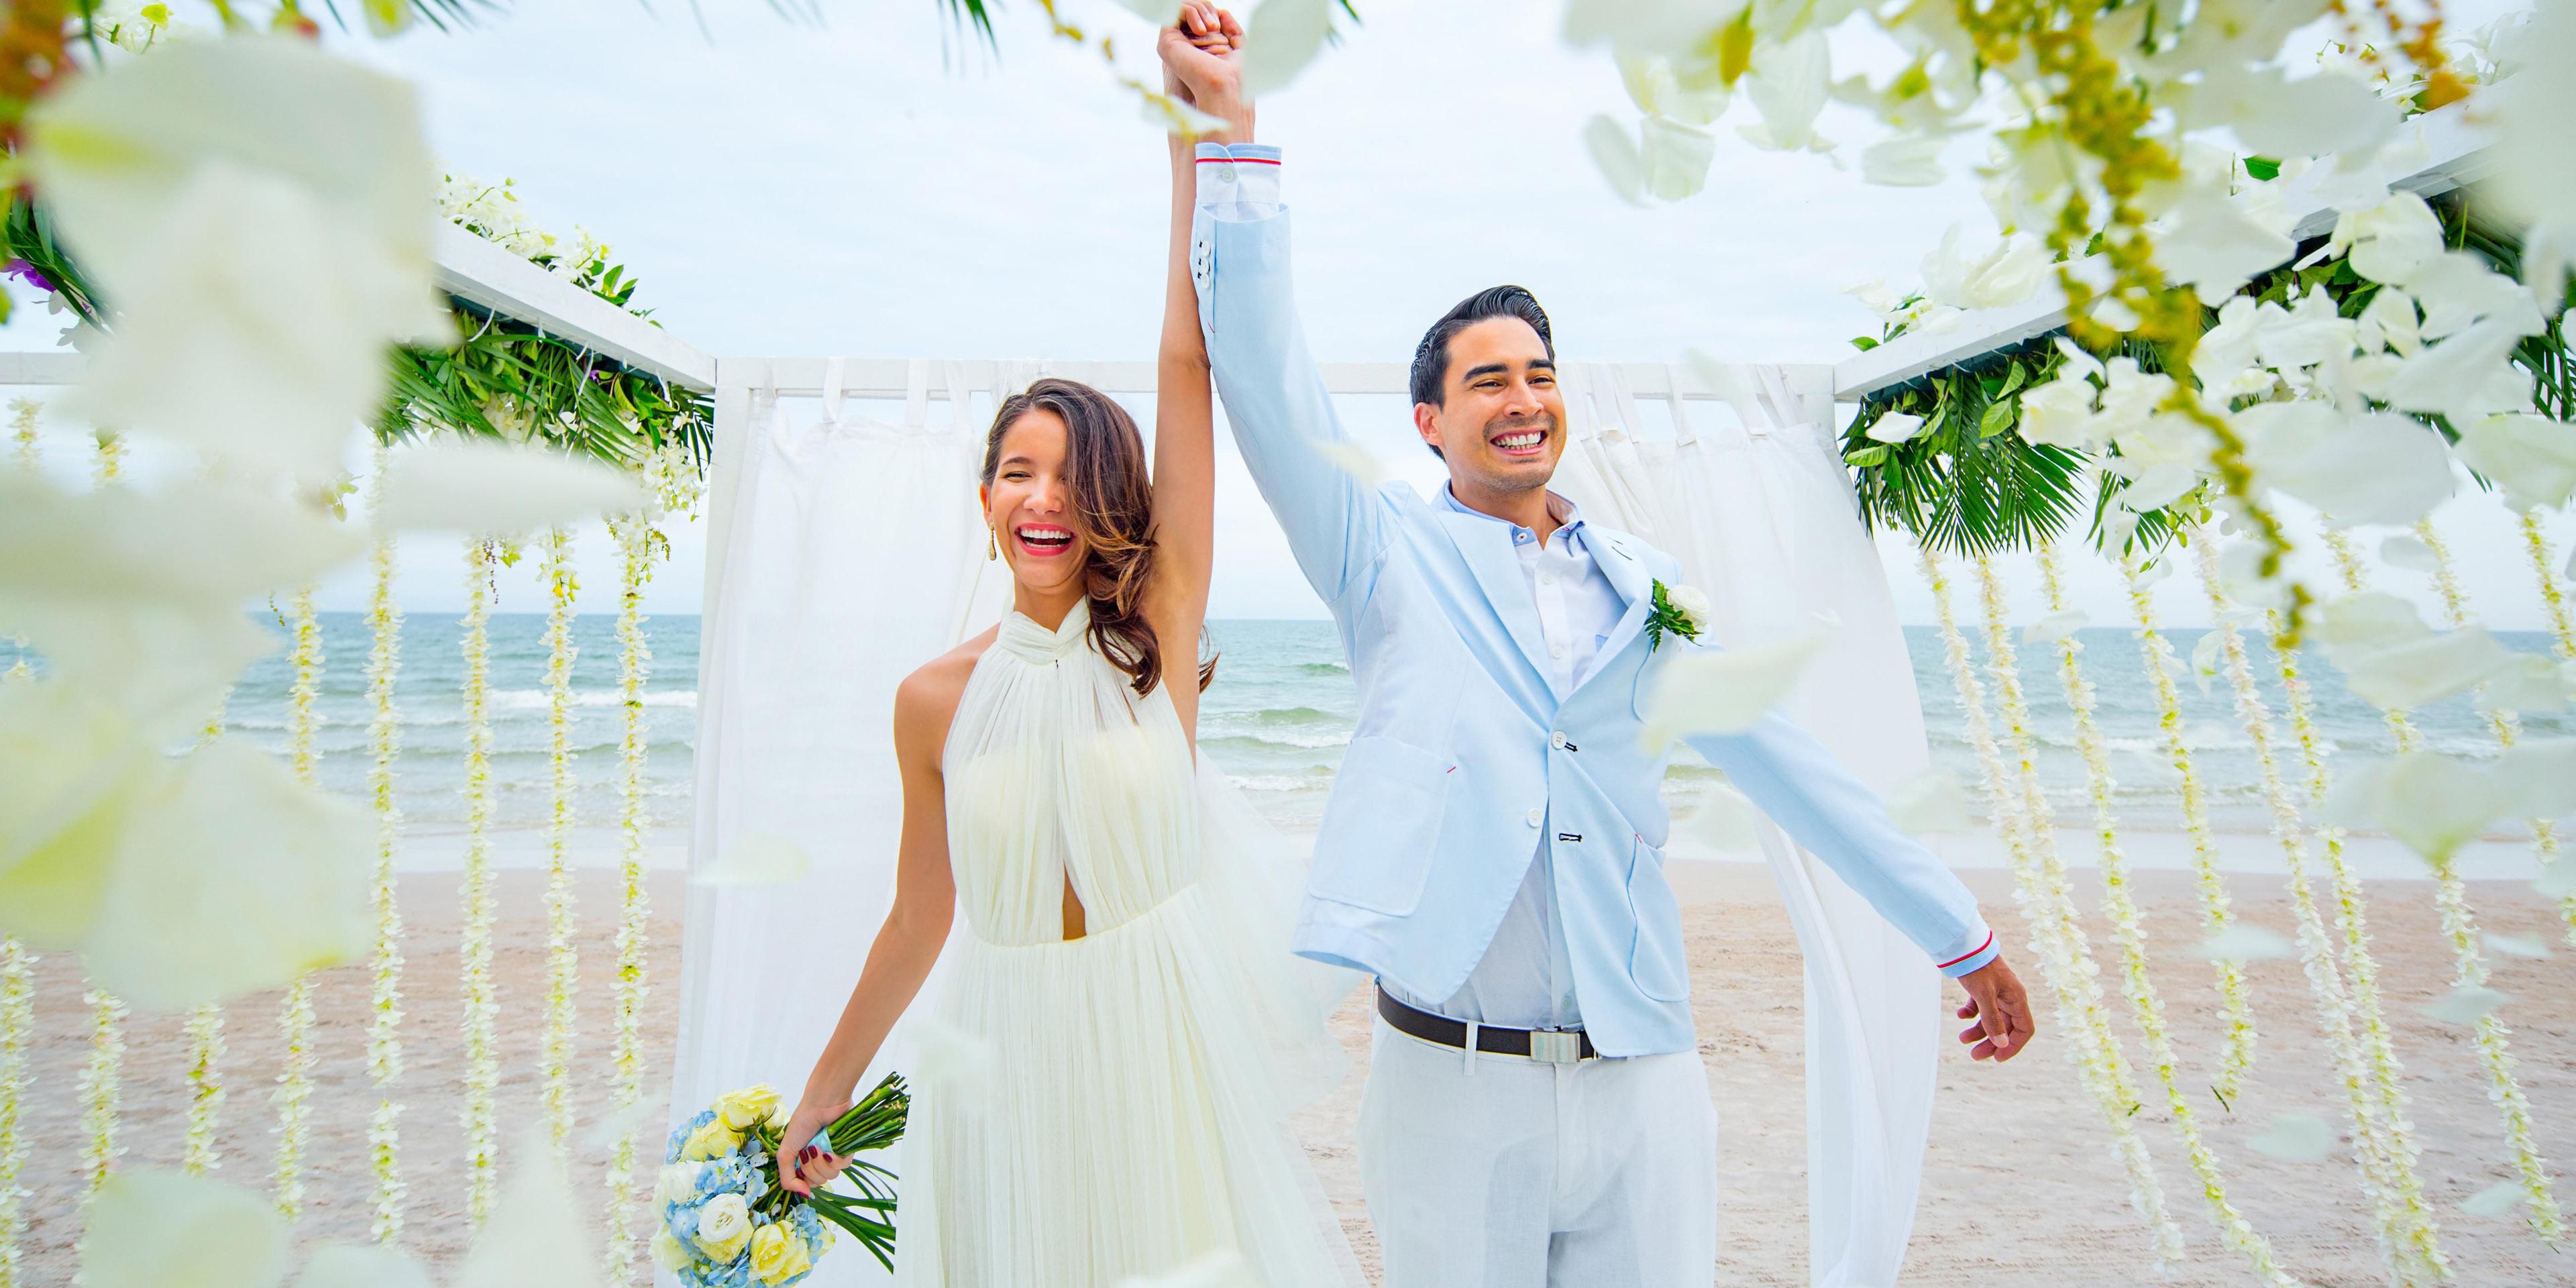 Forever love deserves a location unlike any other. InterContinental Hua Hin Resort is the perfect wedding destination for you. Let our experienced events team coordinate every detail of your perfect day.